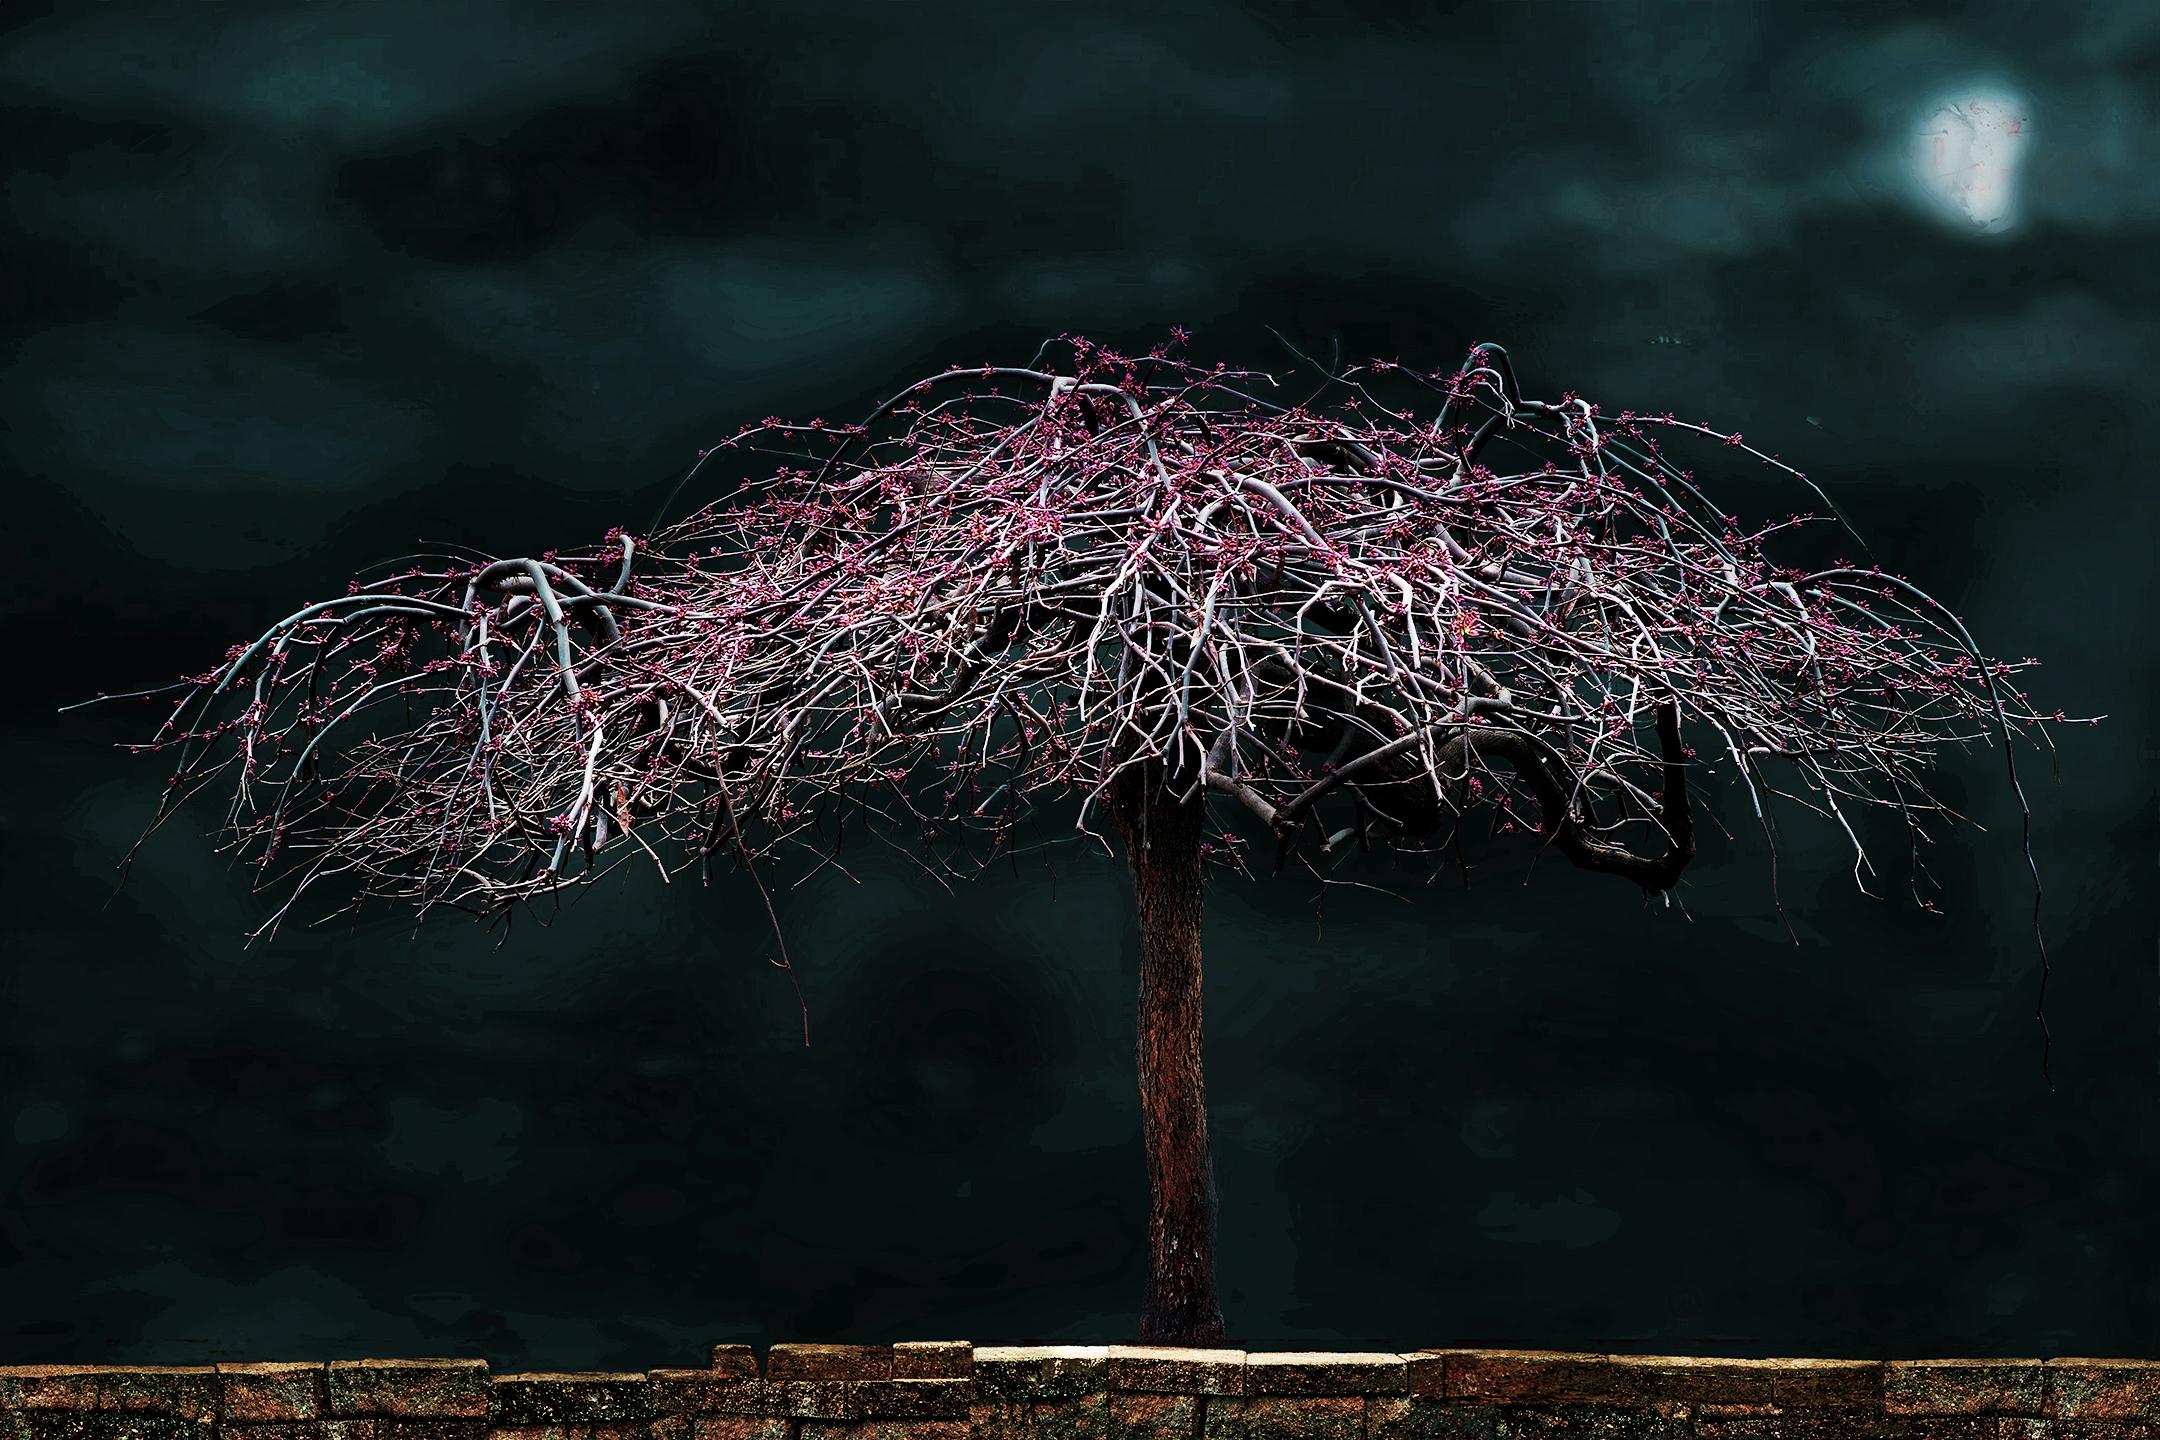 Mary Block Landscape Photograph - A Shy Moon in Spring, Large Scale Manipulated Color Photograph with Red Bud Tree